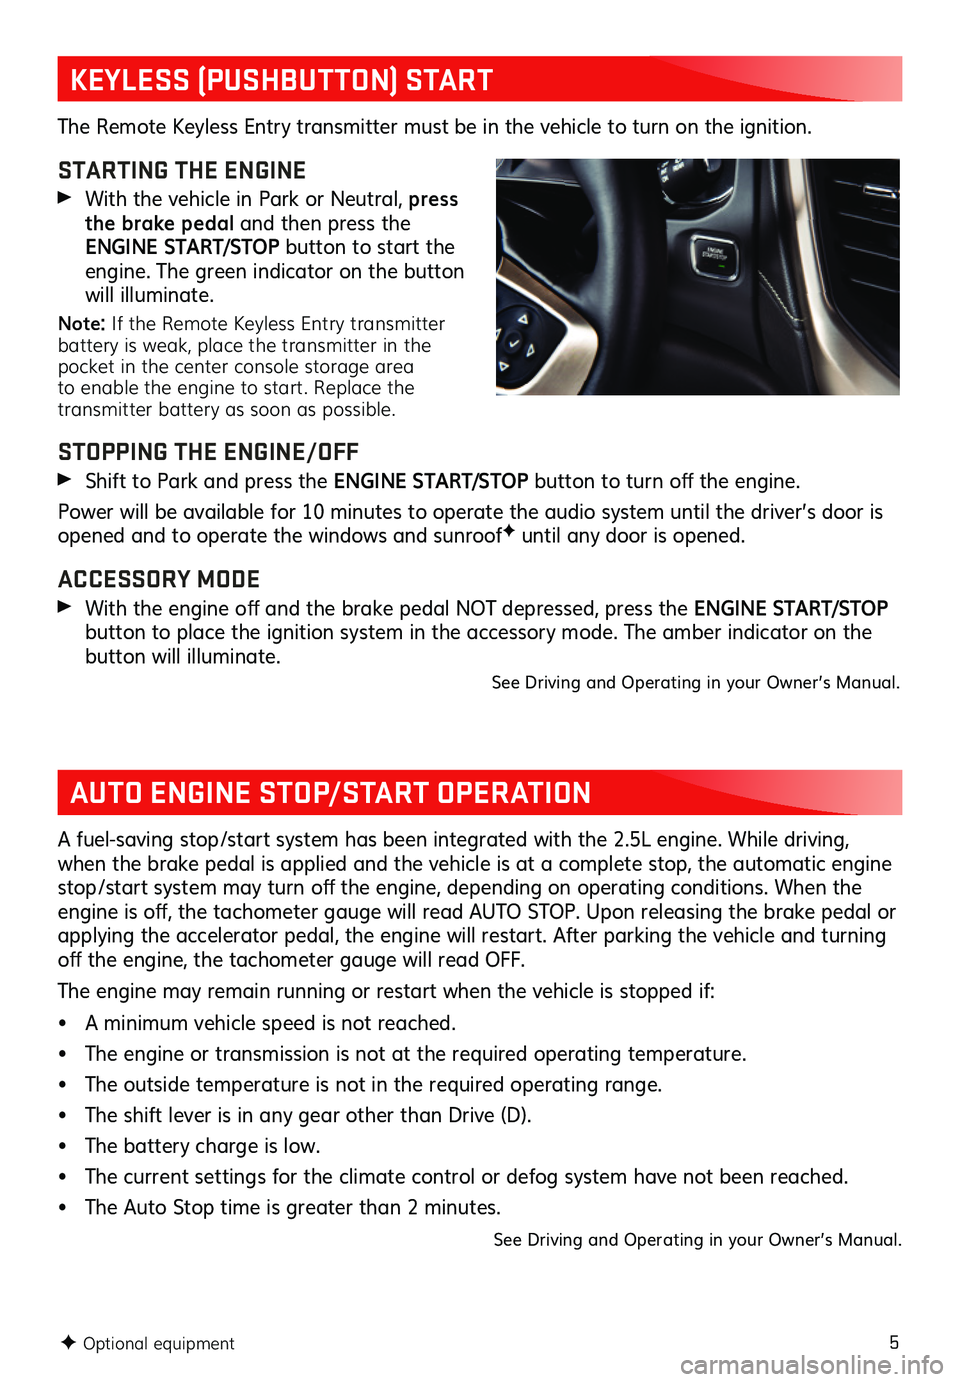 GMC ACADIA 2019  Get To Know Guide 5
KEYLESS (PUSHBUTTON) START
AUTO ENGINE STOP/START OPERATION
The Remote Keyless Entry transmitter must be in the vehicle to turn on the ignition. 
STARTING THE ENGINE 
 With the vehicle in Park or Ne